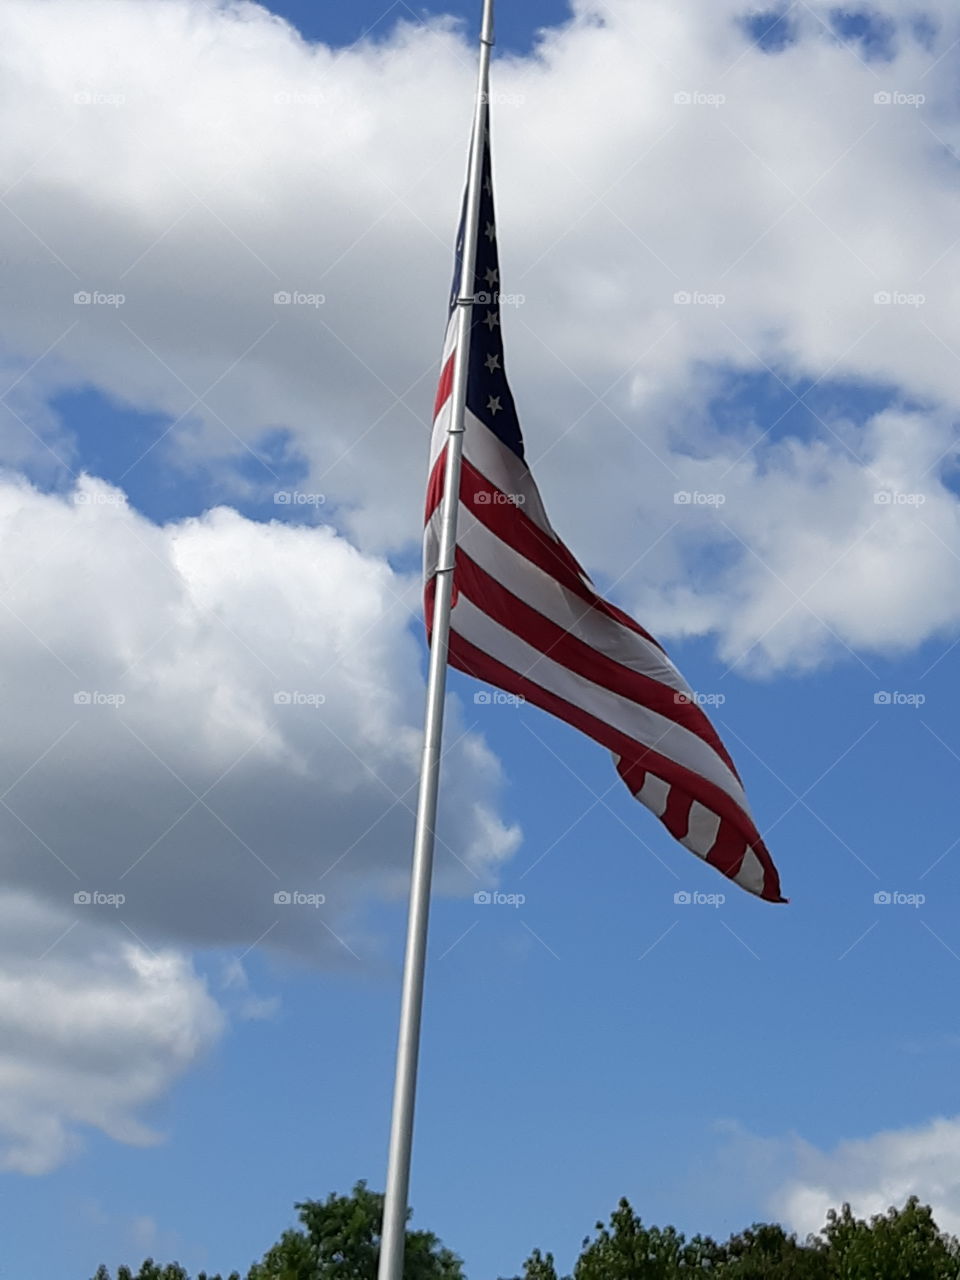 I pledge allegiance to the flag of the United States of America, and to the republic for which it stands, one nation under God indivisible with liberty and justice for all!